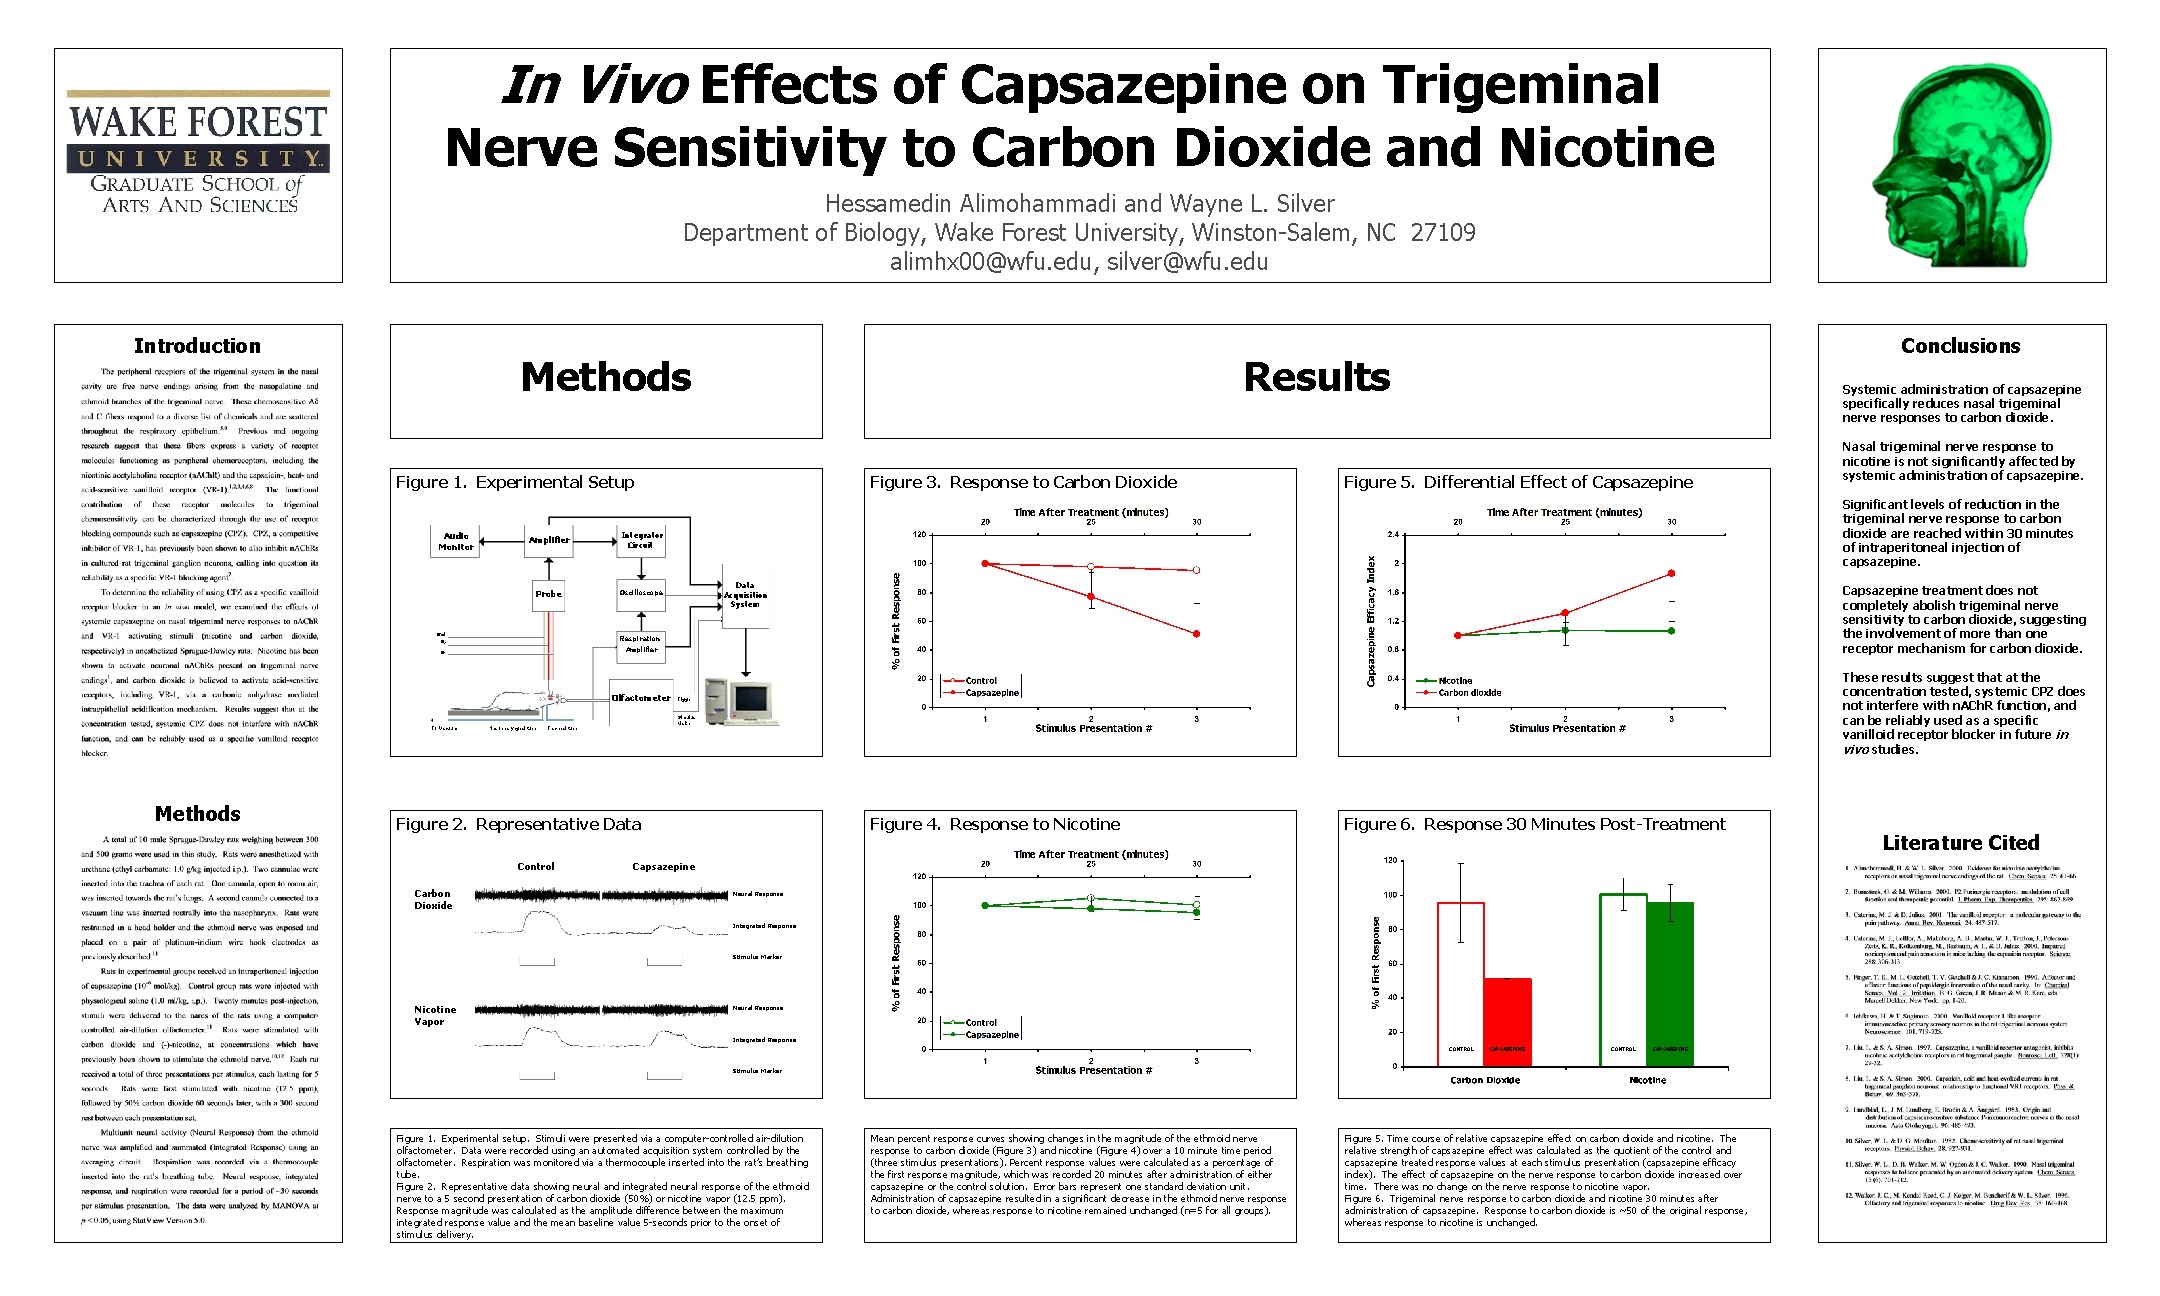 In Vivo Effects of Capsazepine on Trigeminal Nerve Sensitivity to Carbon Dioxide and Nicotine